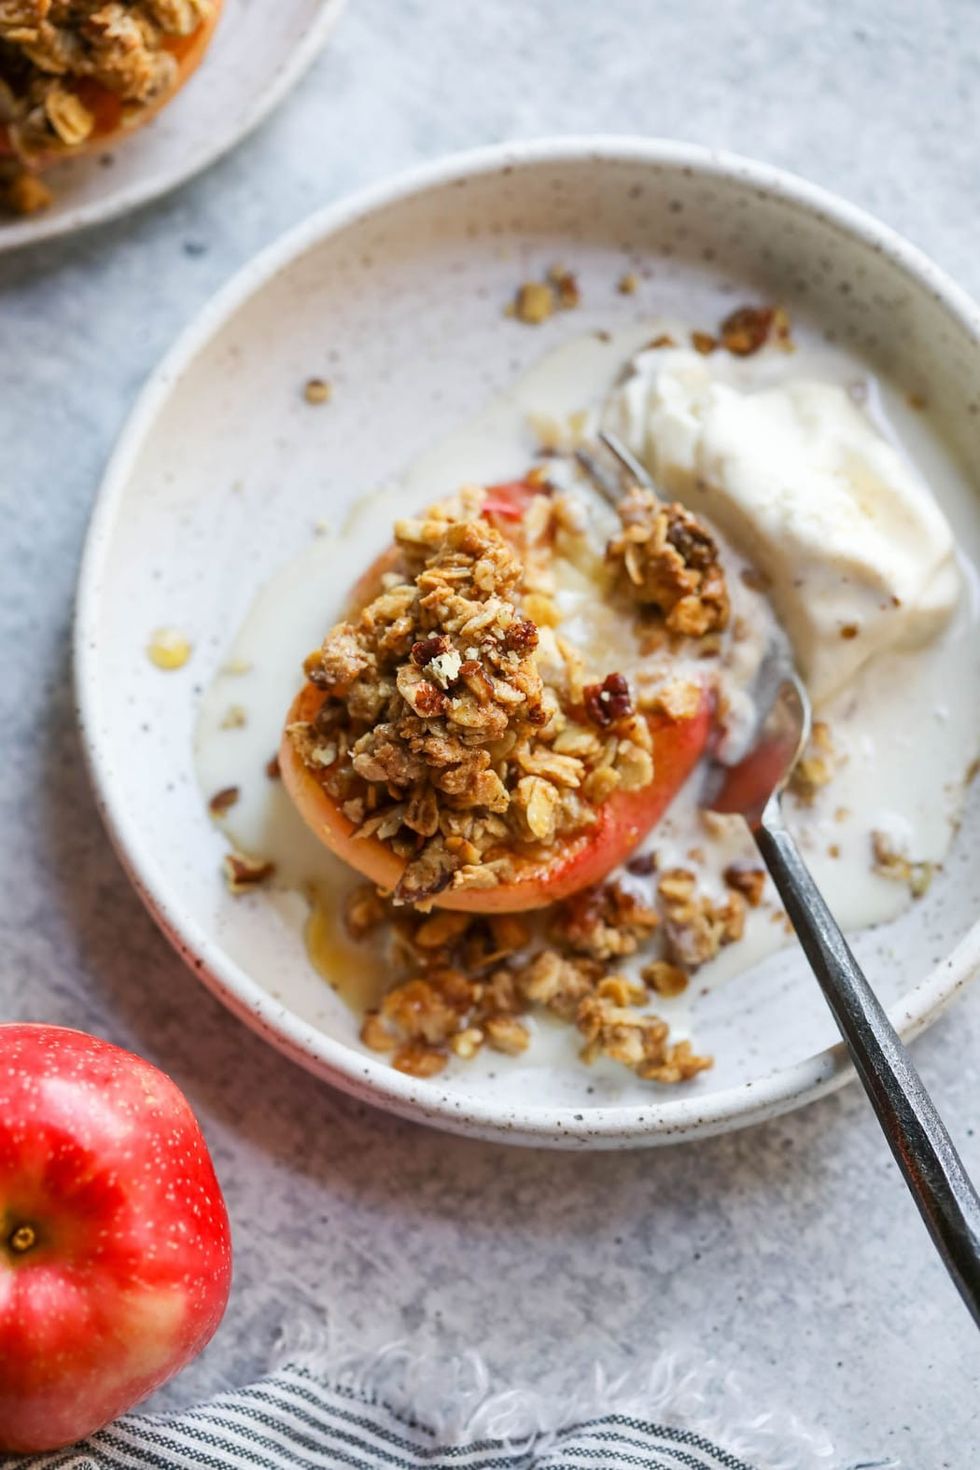 Baked Apples with Crumb Topping